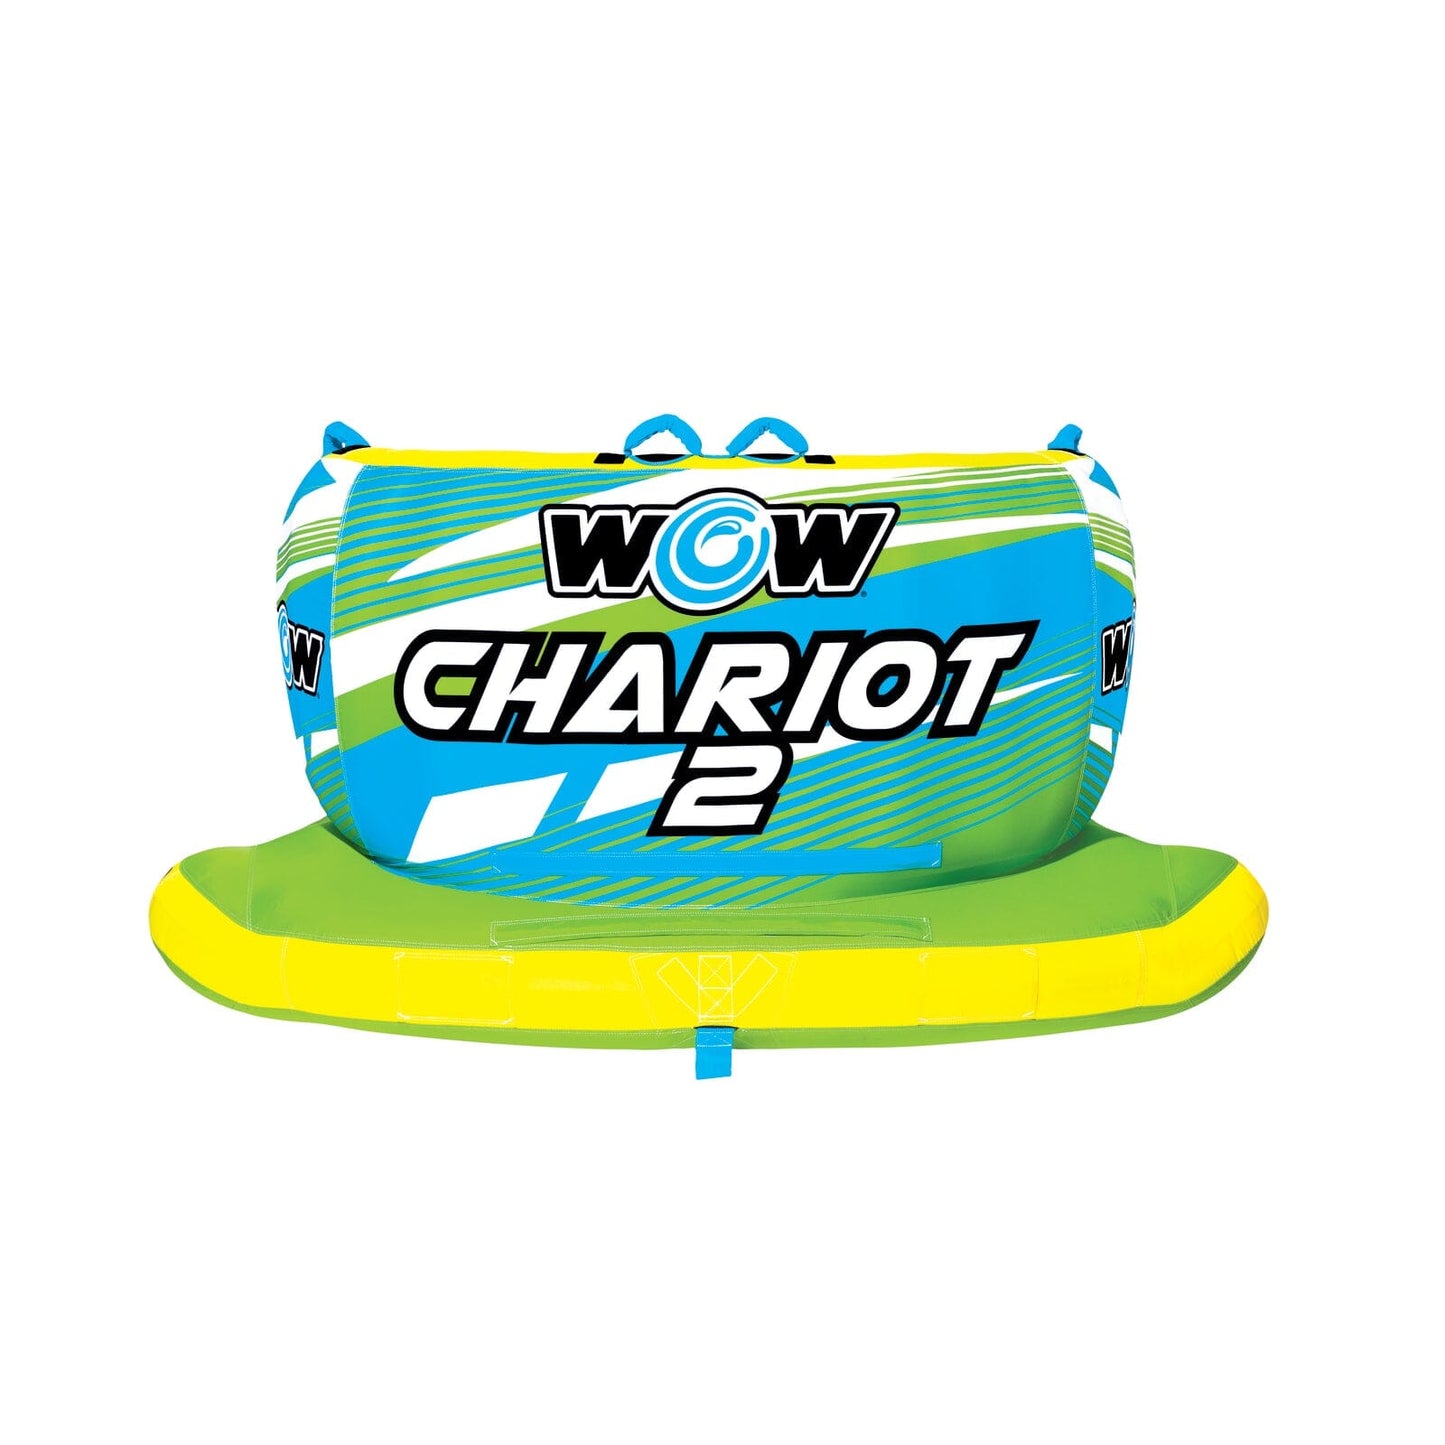 The Chariot 2P Towable